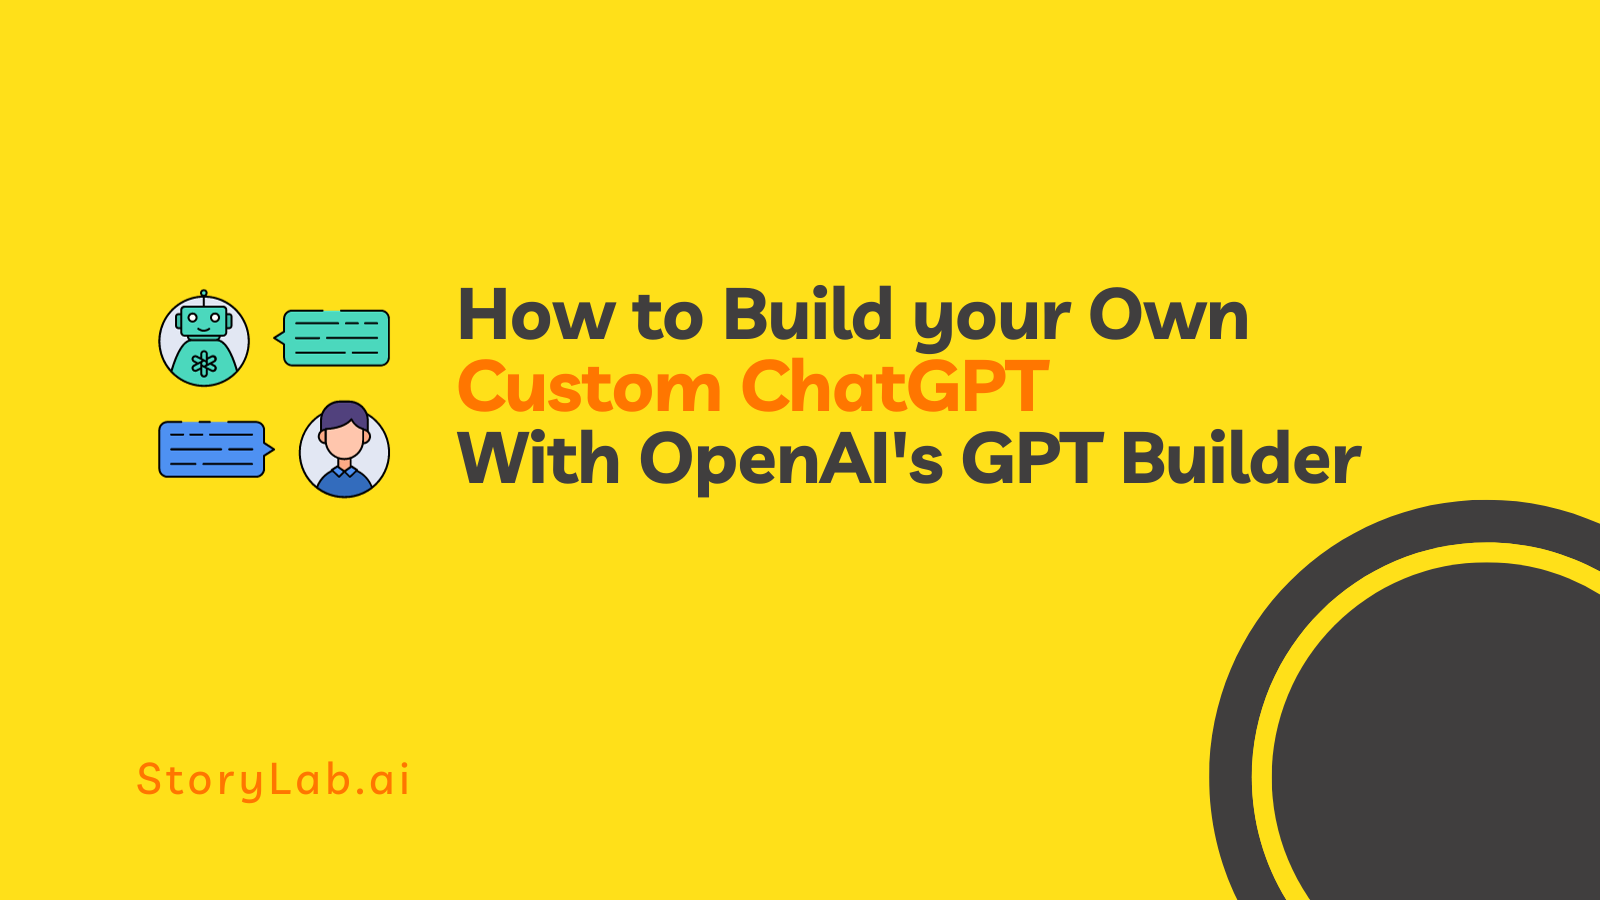 How to build your own custom ChatGPT with OpenAI GPT builder